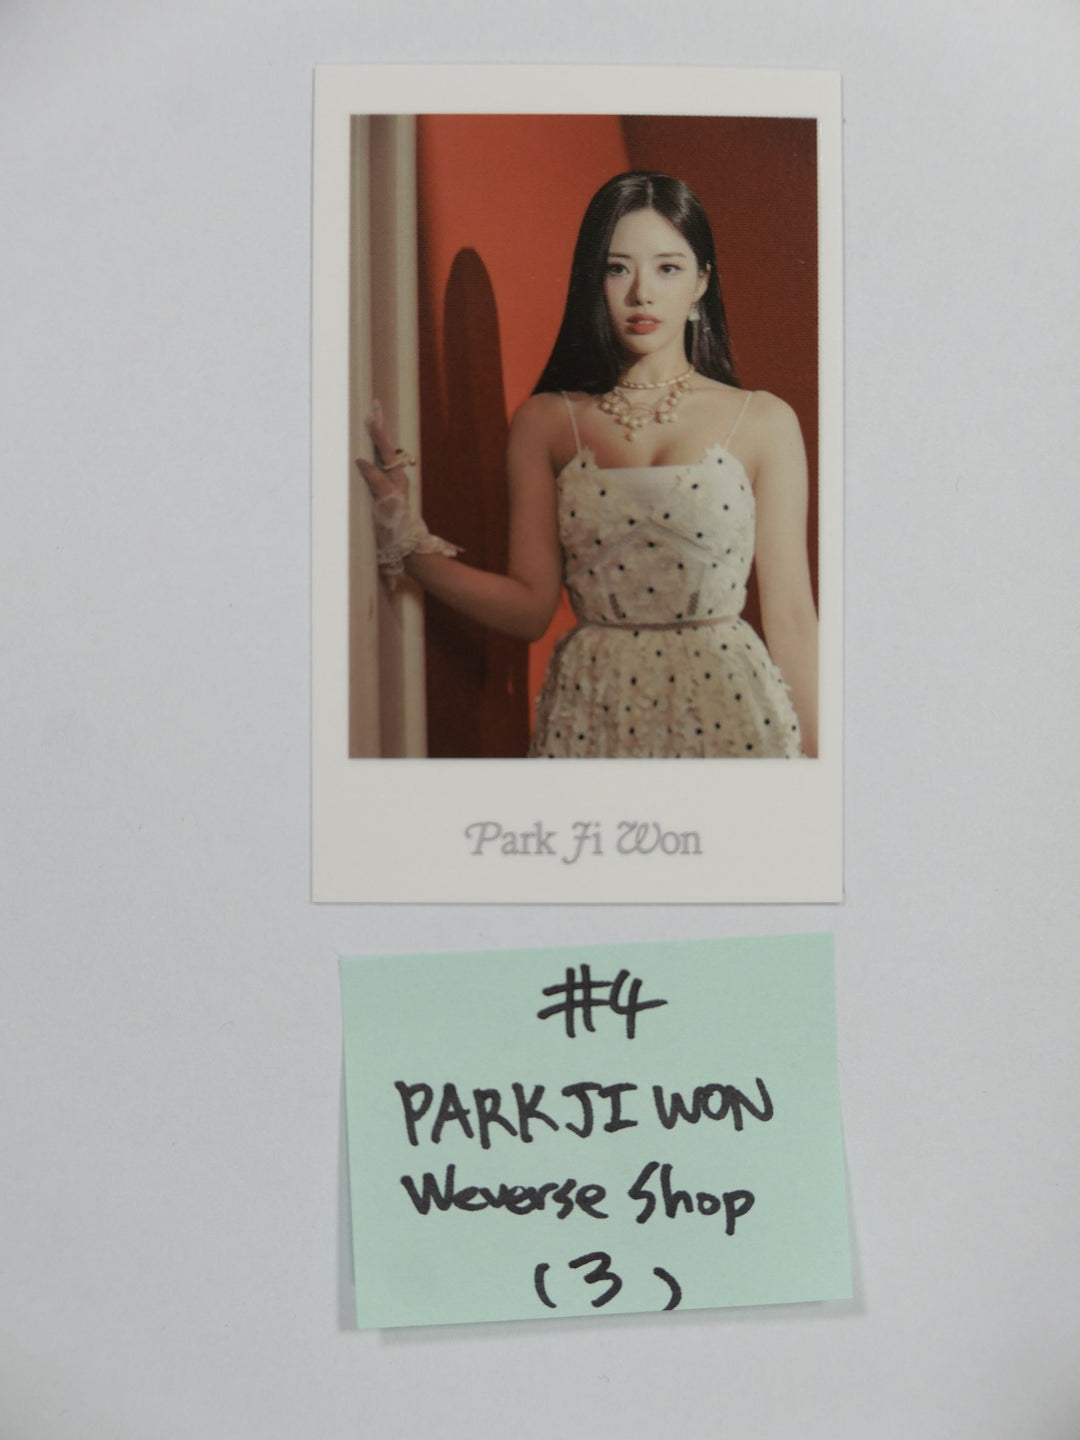 Fromis_9 "Midnight Guest" - Weverse Shop Pre-Order Benefit Polaroid Type Photocard